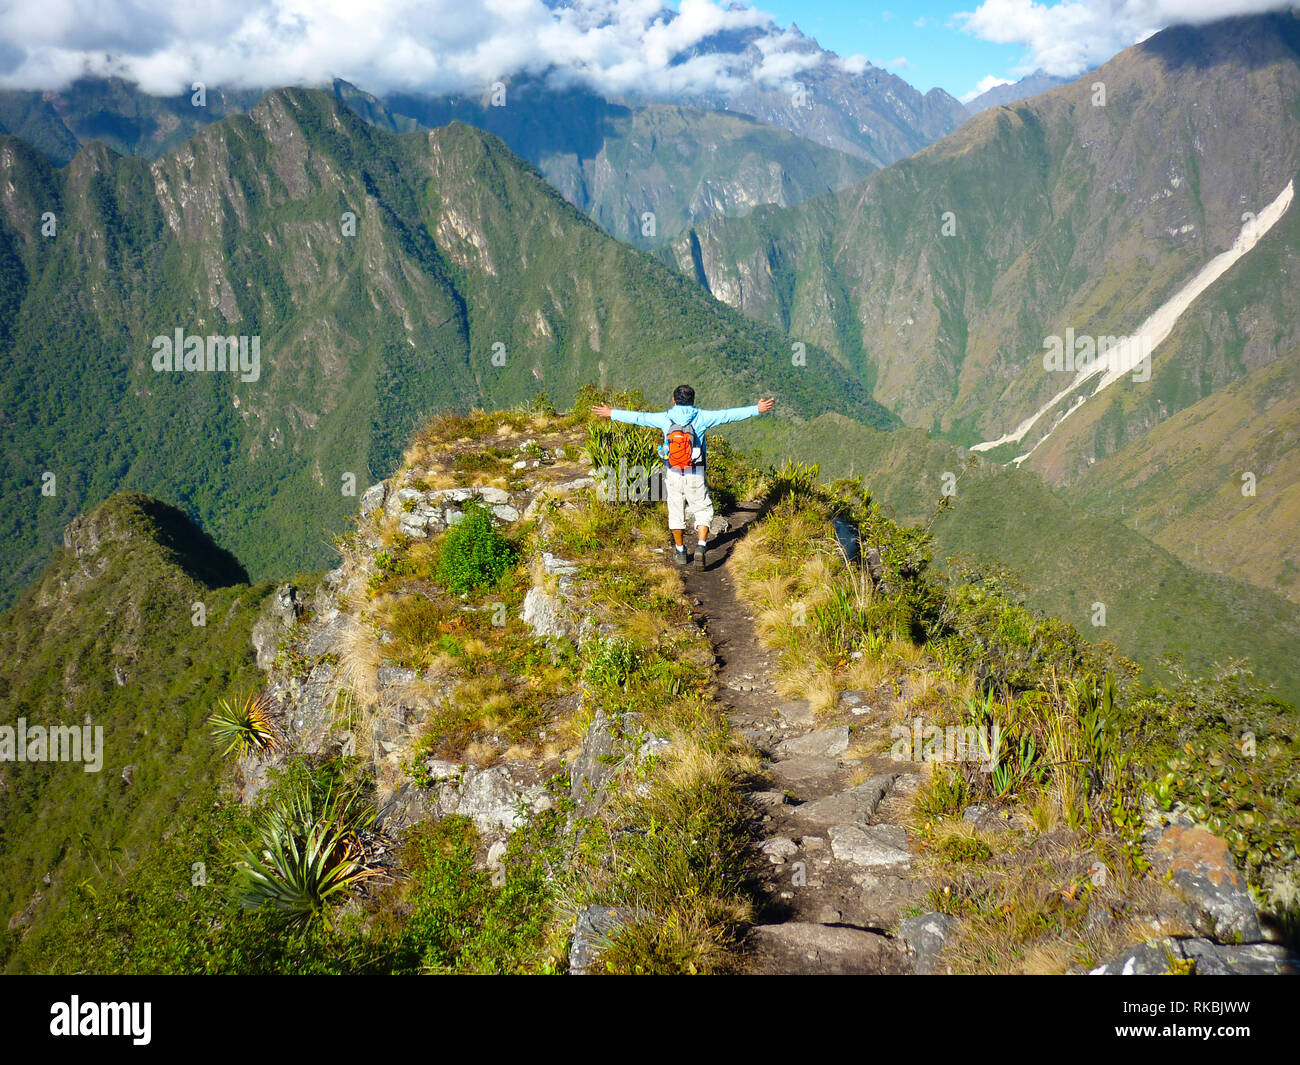 Free man in nature after achieving to get to the peak of Machu Picchu Stock Photo